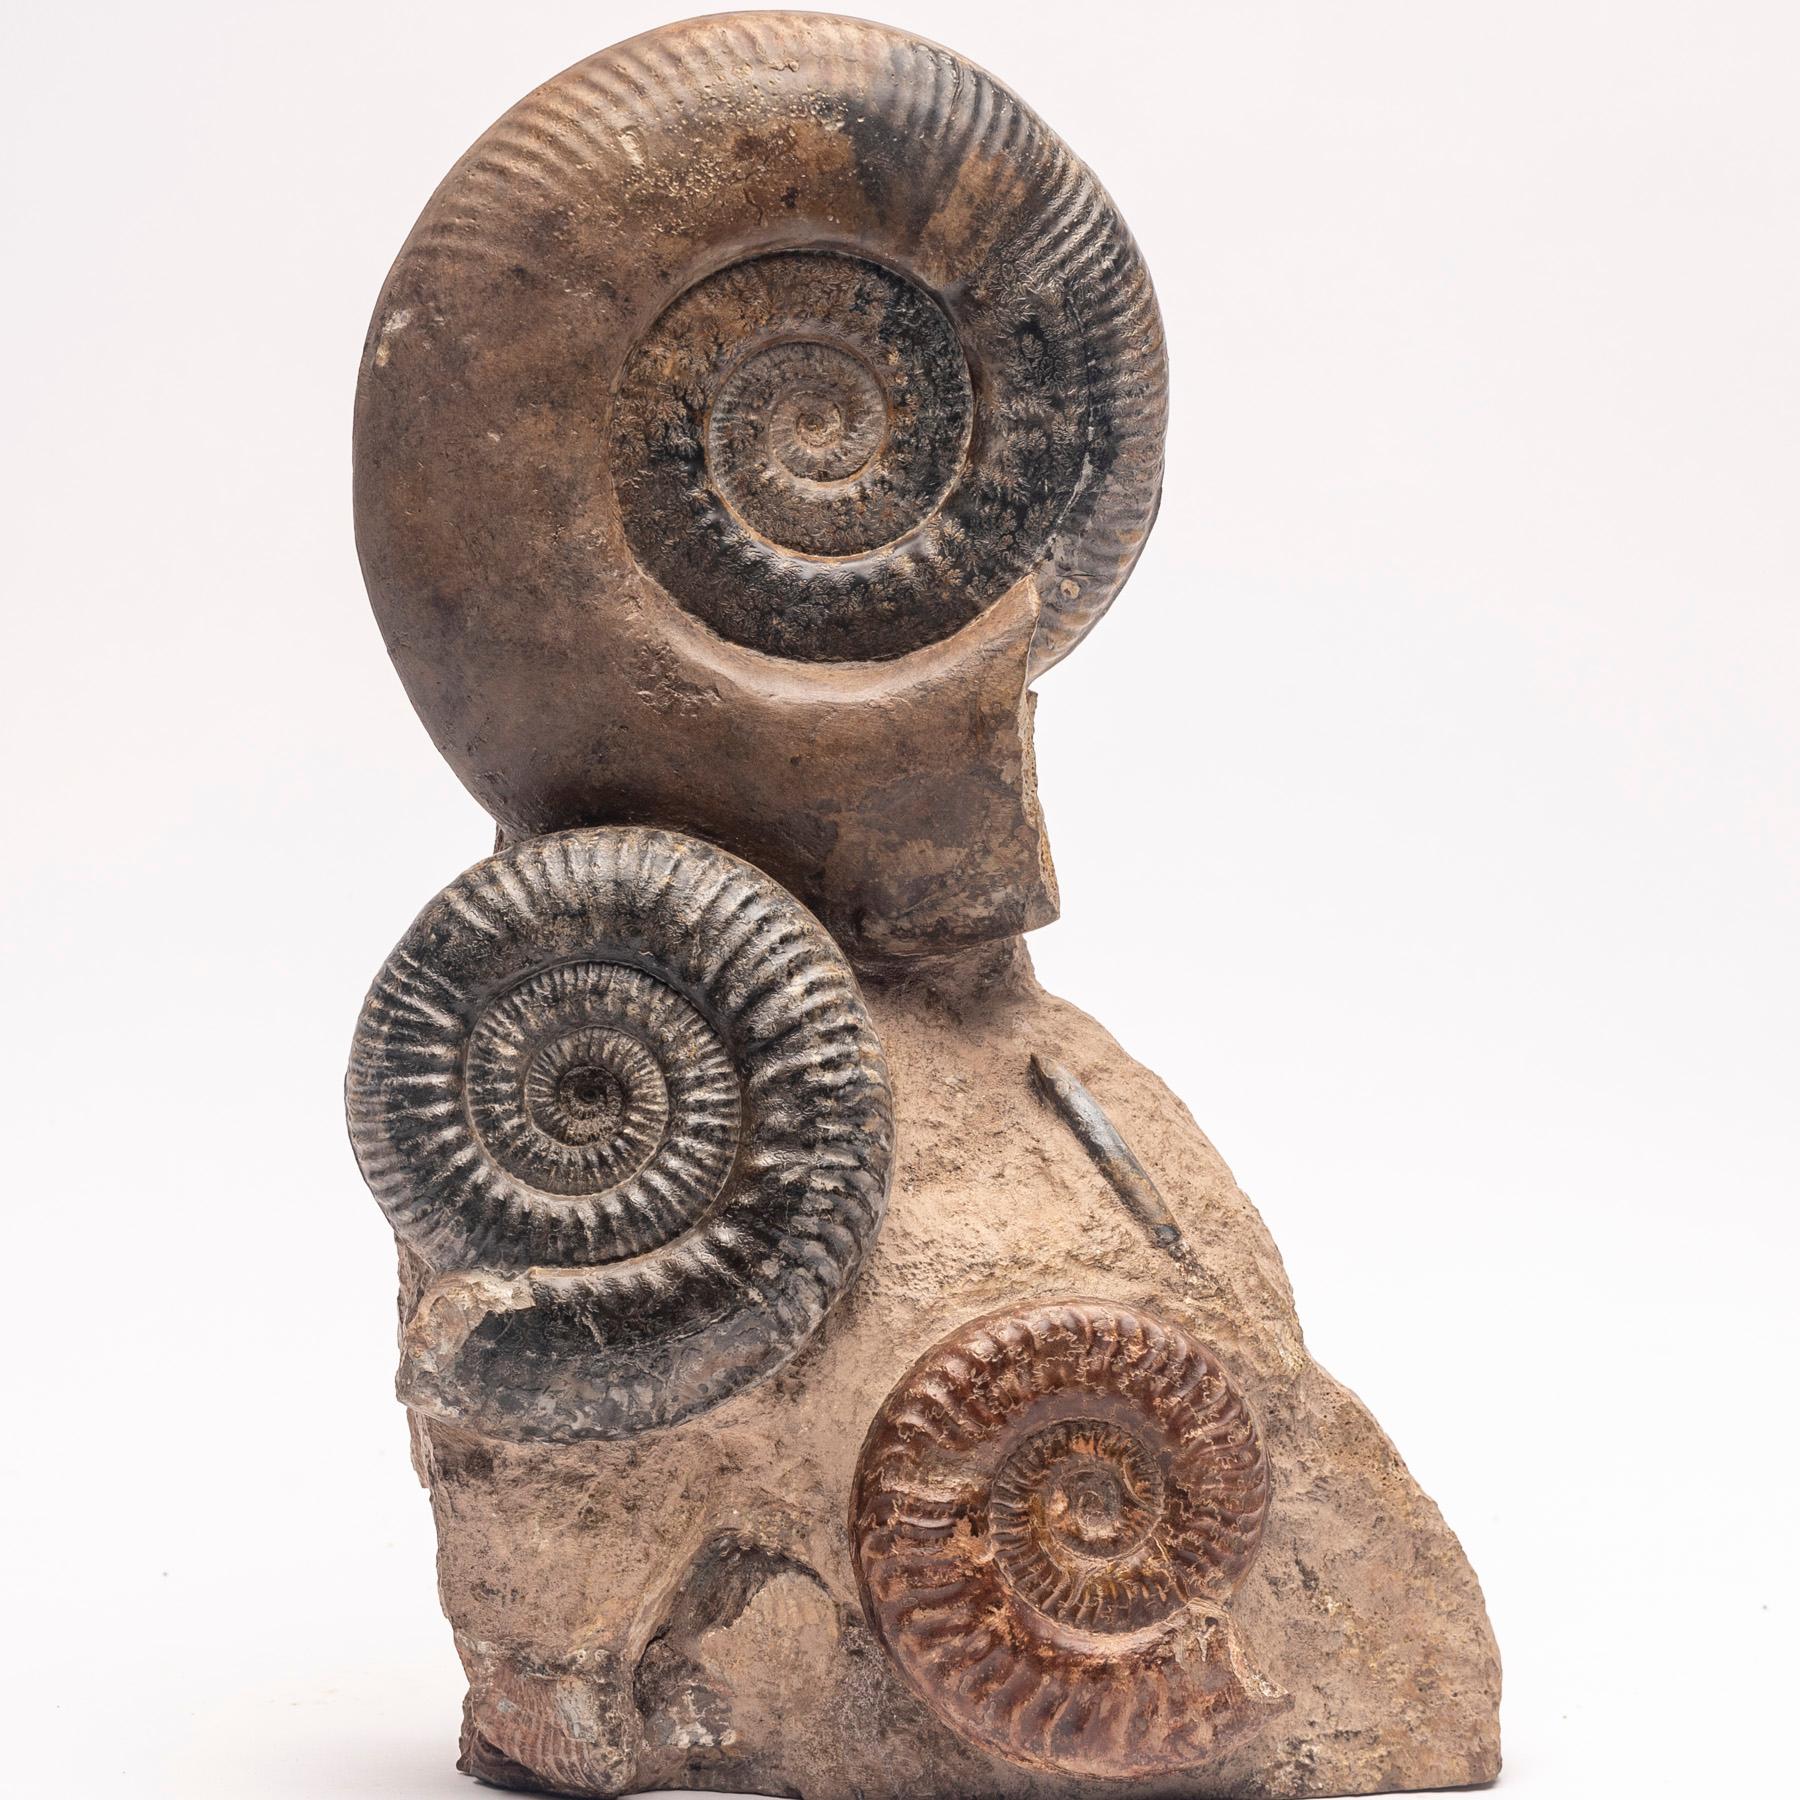 Mexican Free Standing Fossil Ammonite Cluster from Madagascar, Cretaceous Period